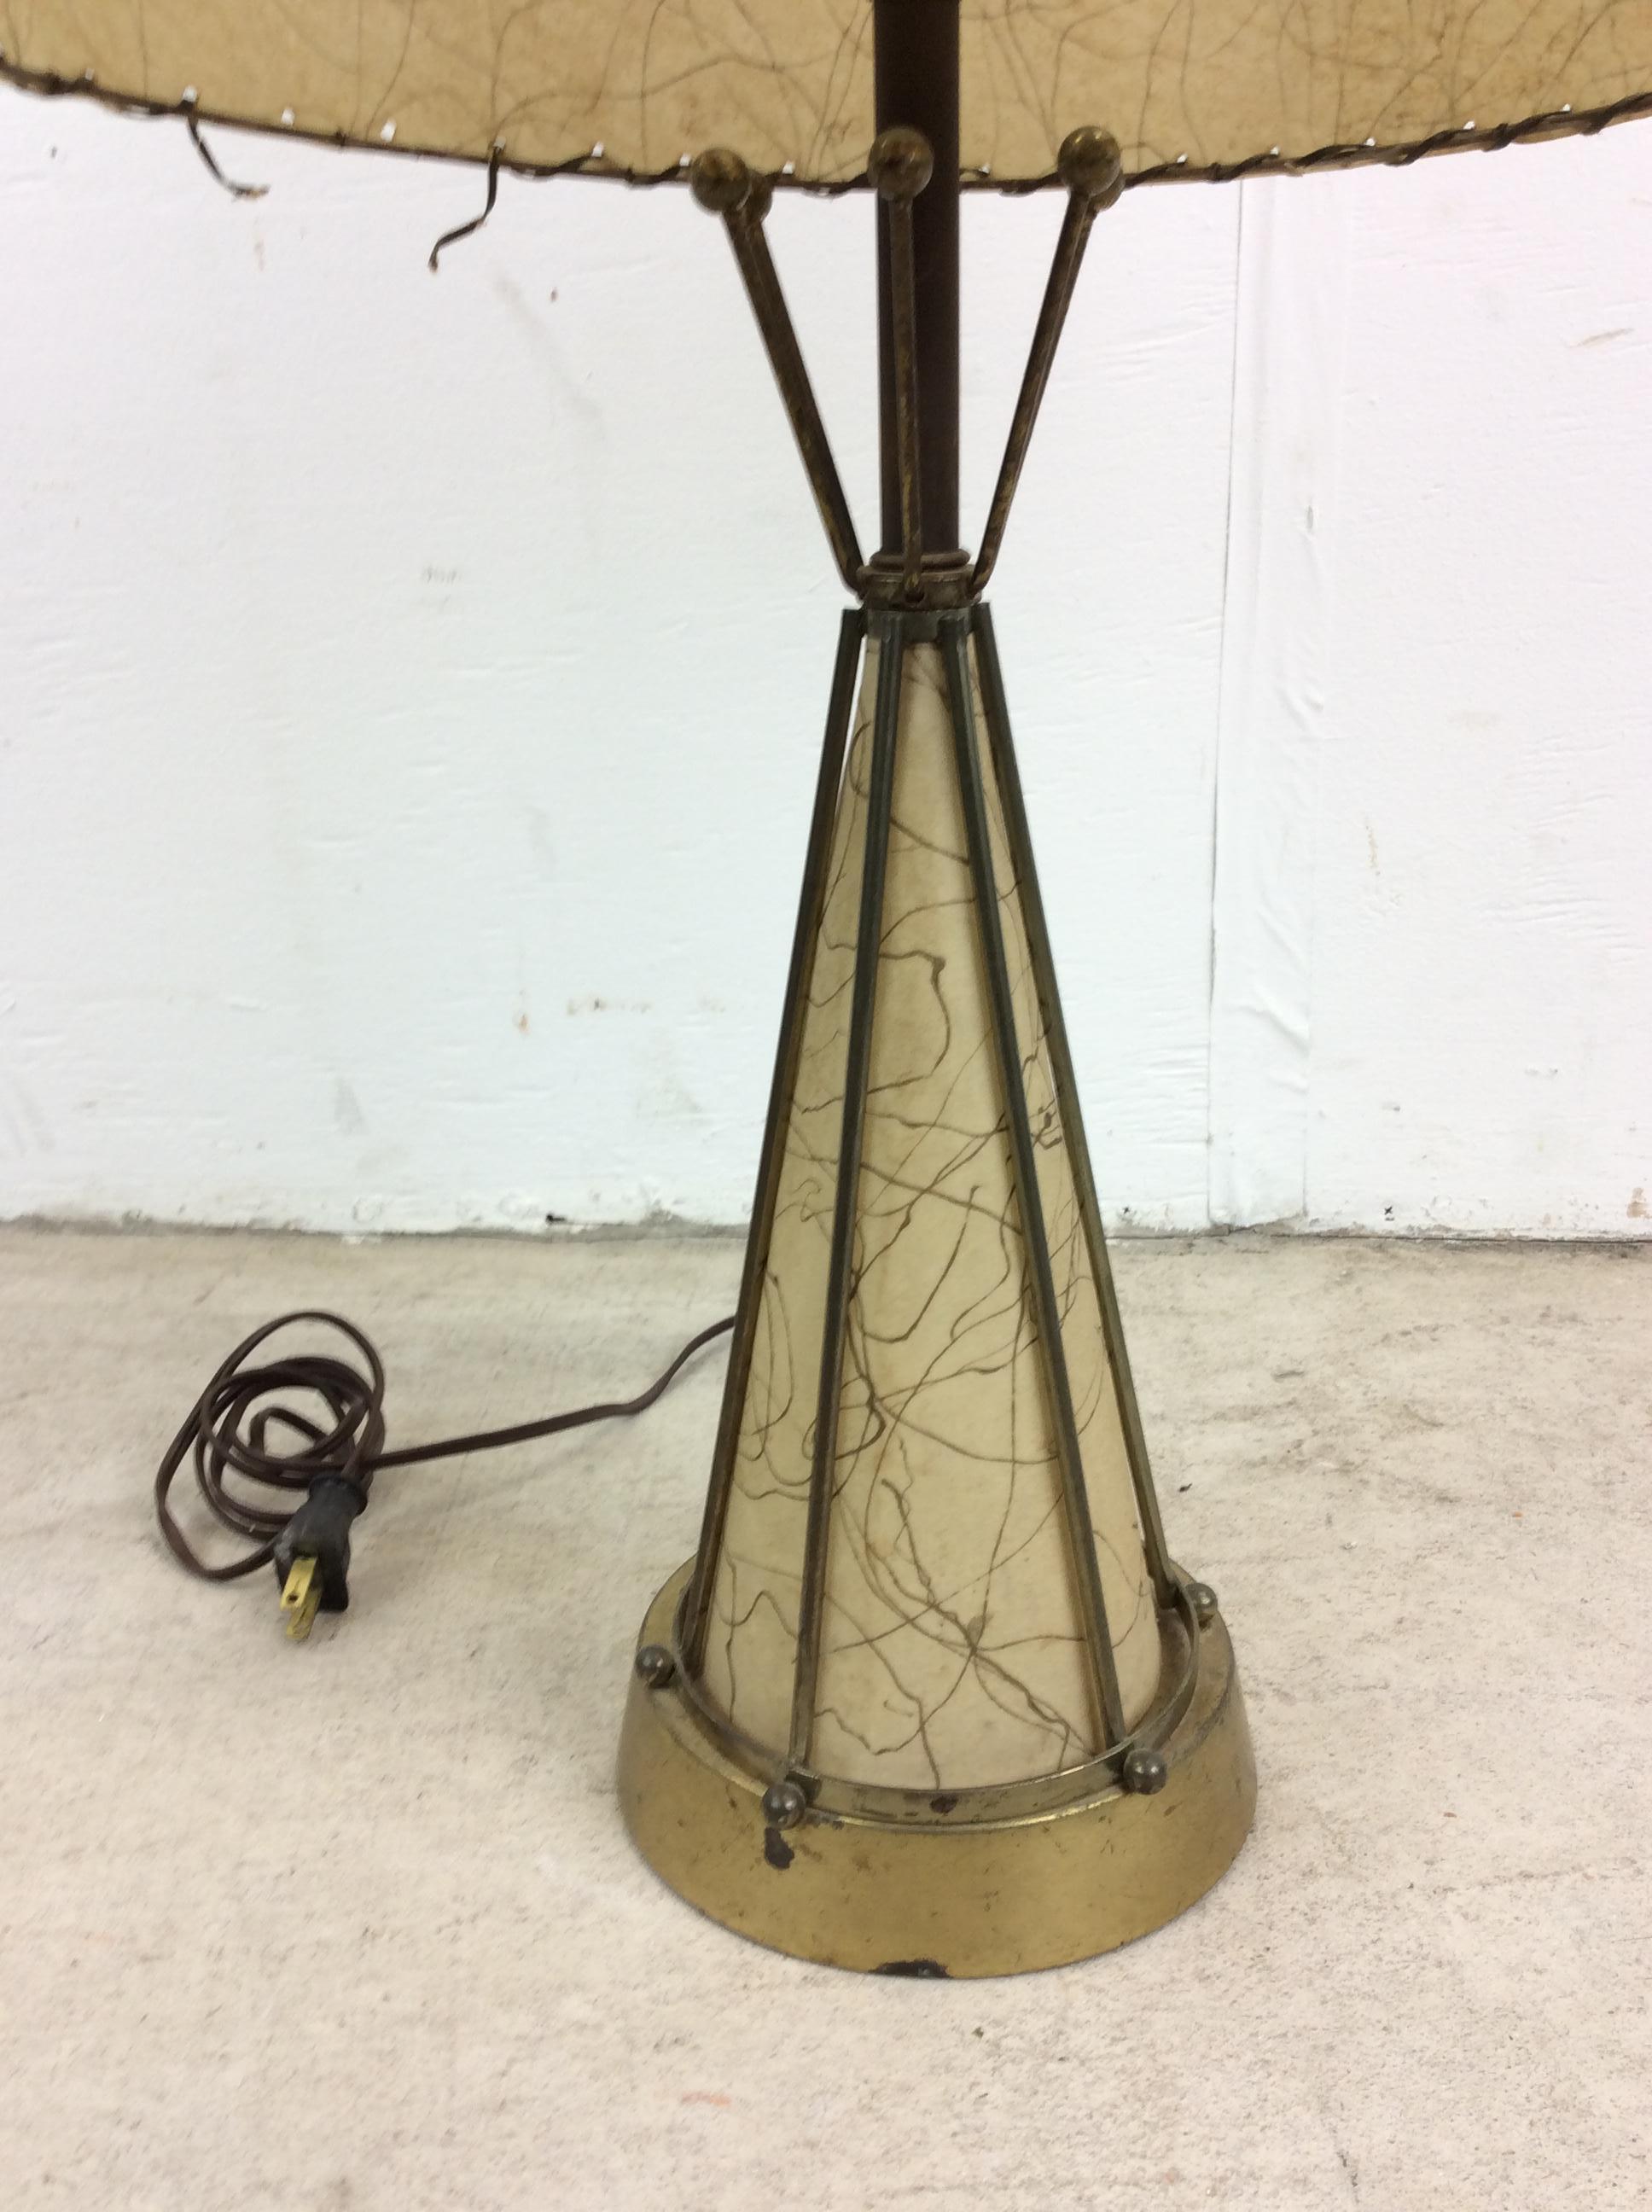 This mid century modern table lamp features brass body with naugahyde interior and a uniquely MCM naugahyde barrel shade.  Matching red table lamp available separately.

Dimensions: 16w 16d 24h

Condition: The vintage brass body of this lamp is